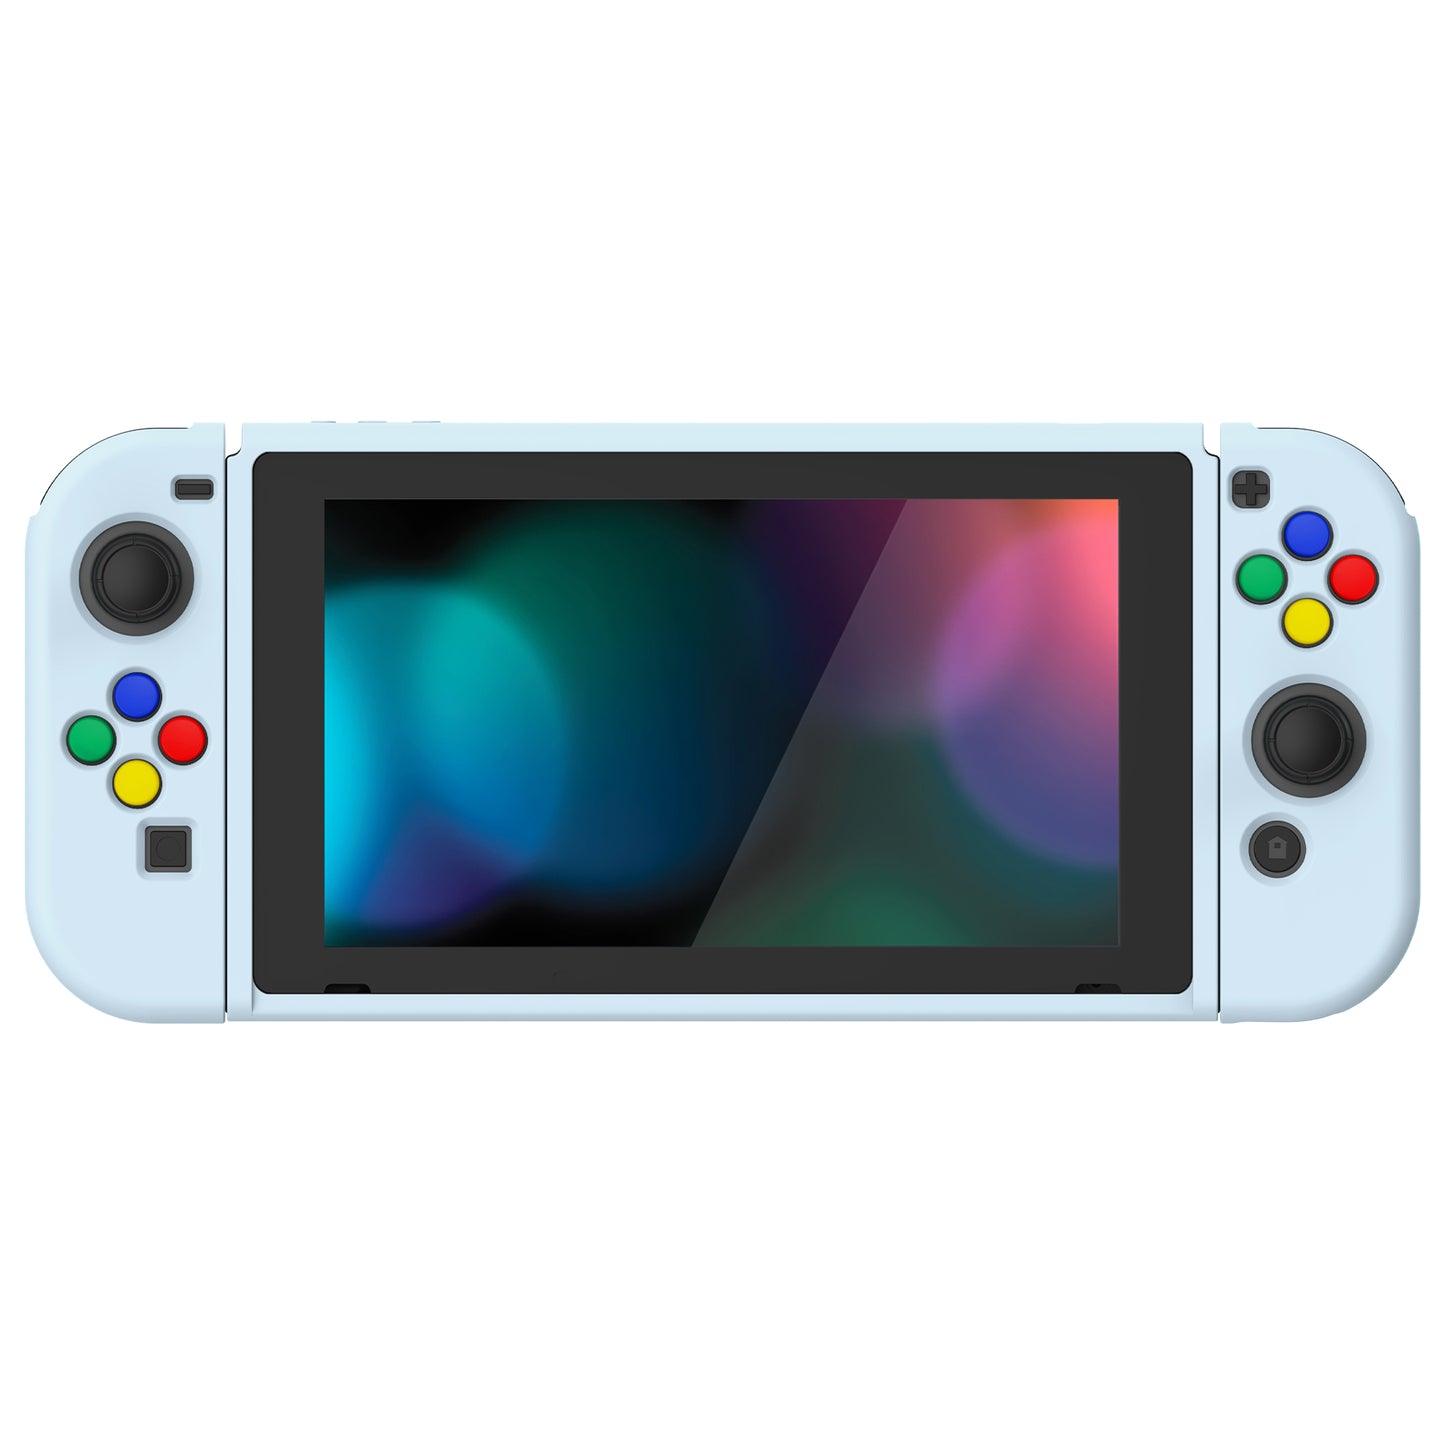 PlayVital Sky Blue Protective Case for NS Switch, Soft TPU Slim Case Cover for NS Switch Console with Colorful ABXY Direction Button Caps - NTU6038G2 PlayVital